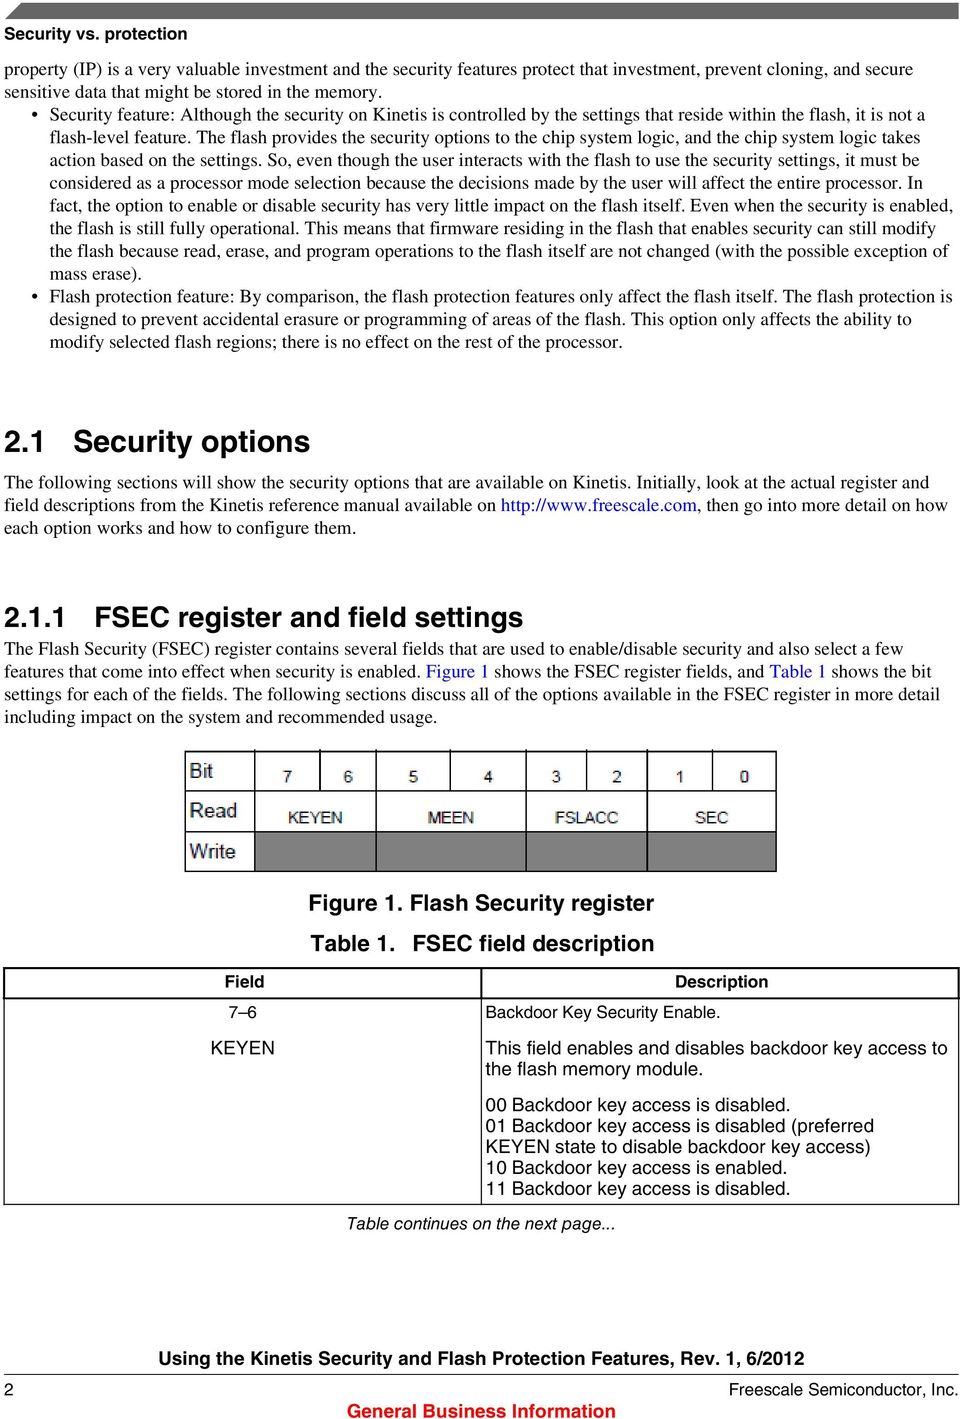 The flash provides the security options to the chip system logic, and the chip system logic takes action based on the settings.